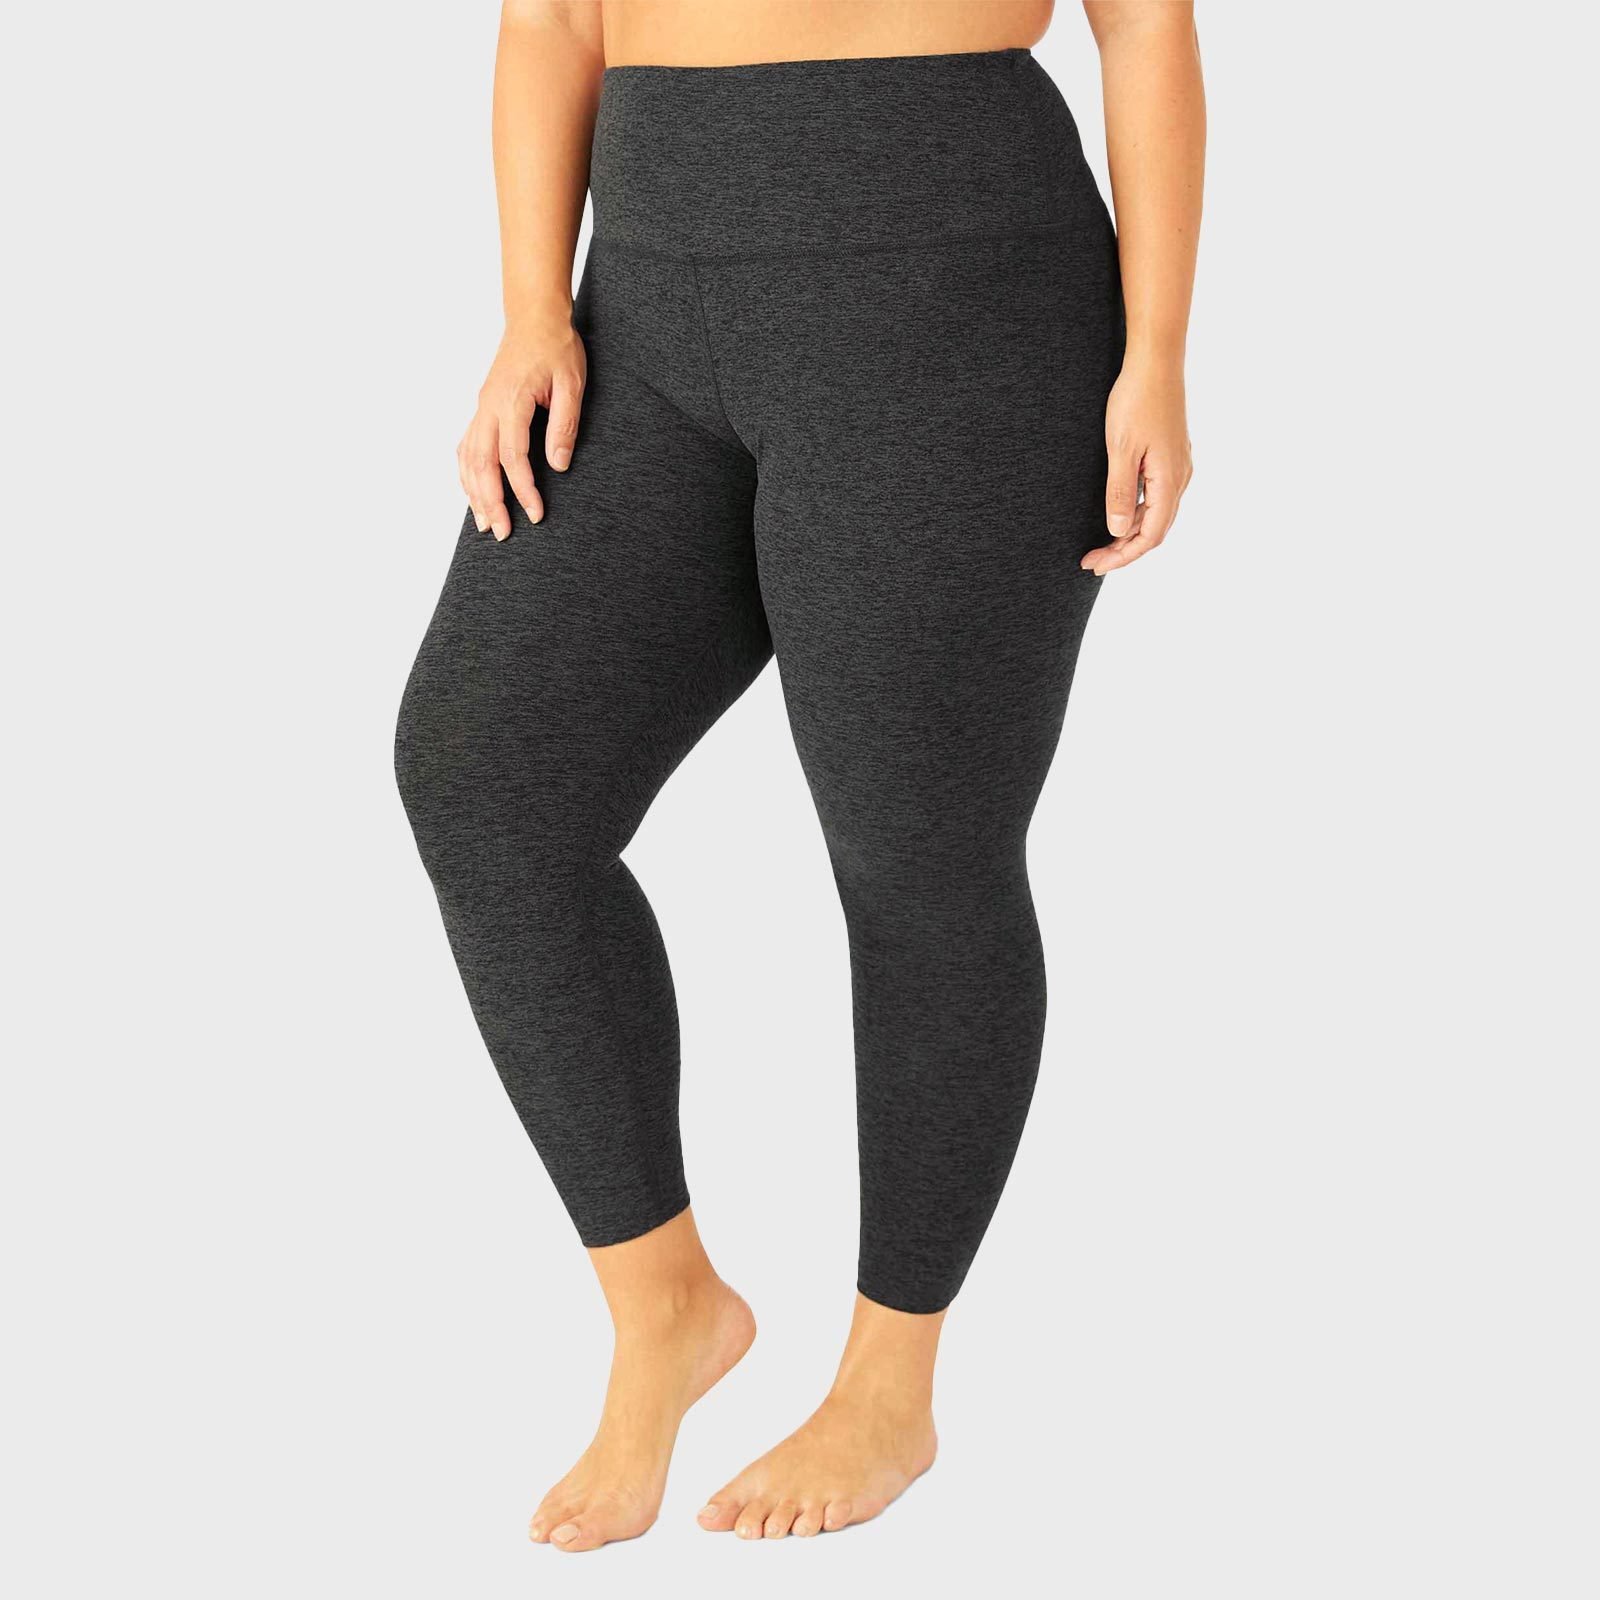 The Best Plus-Size Activewear For Women in 2023